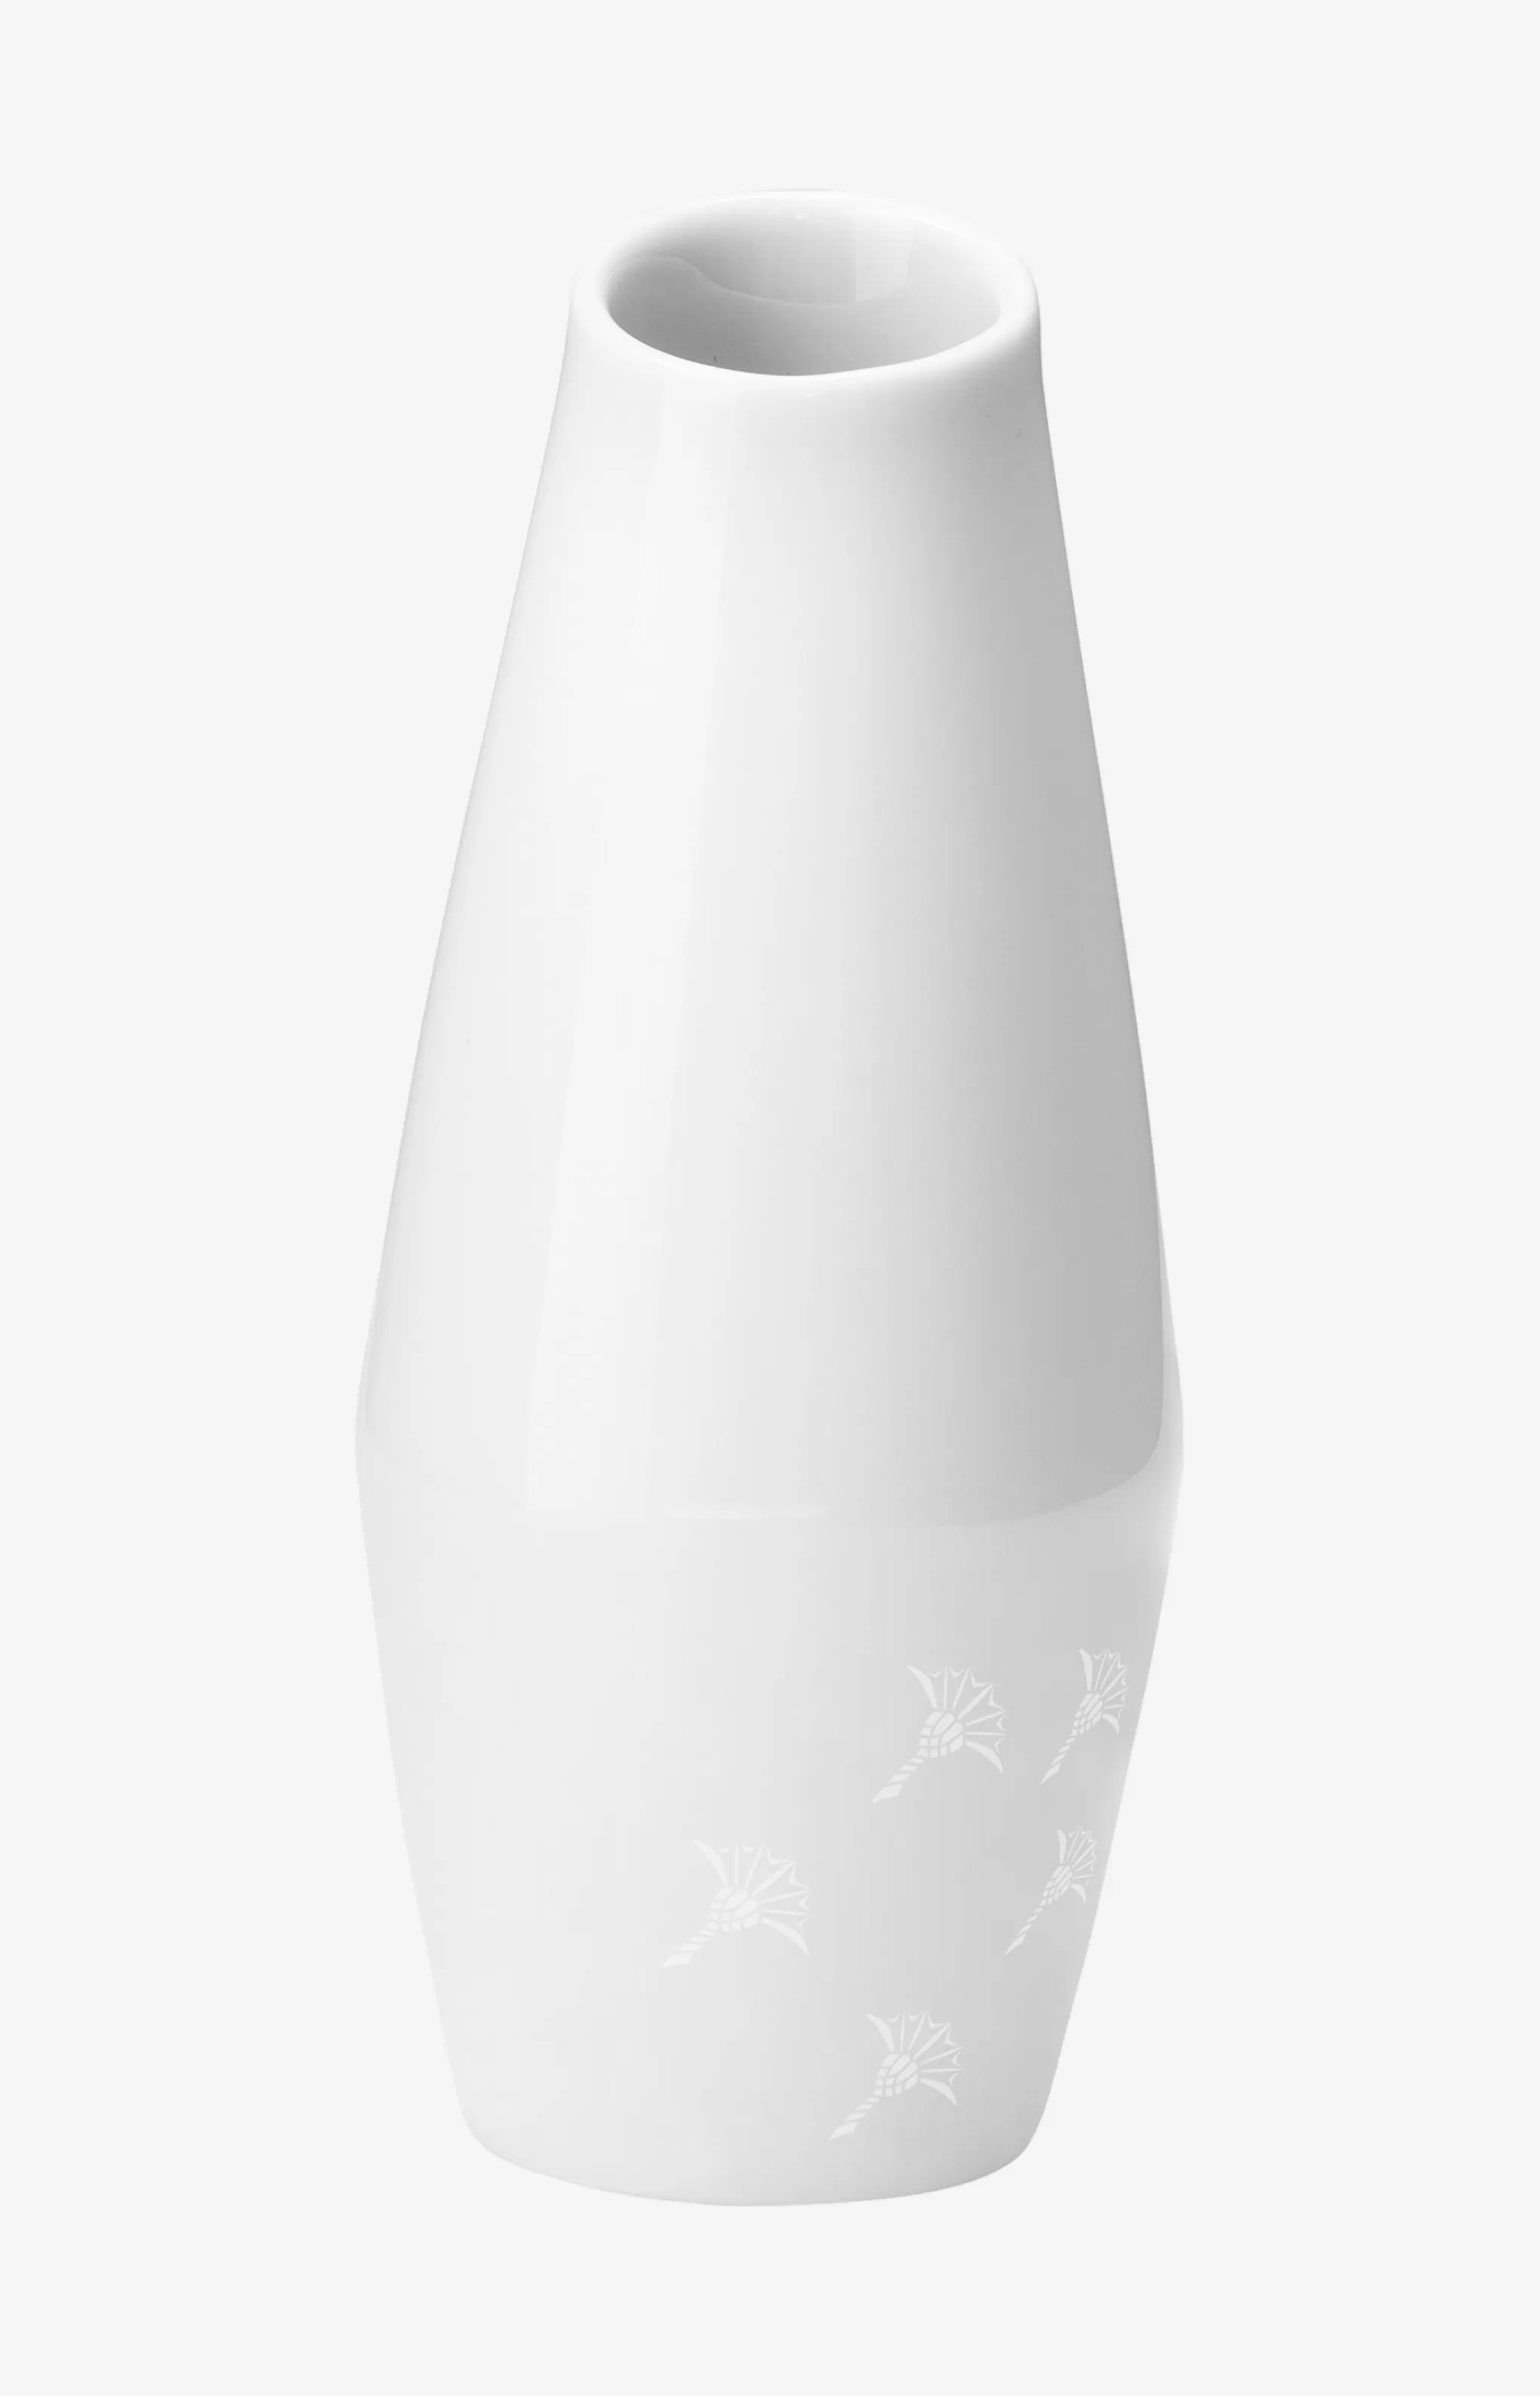 Tableware | Discover Everything*JOOP Tableware | Discover Everything Faded Cornflower Carafe/Vase in - 13 cm height